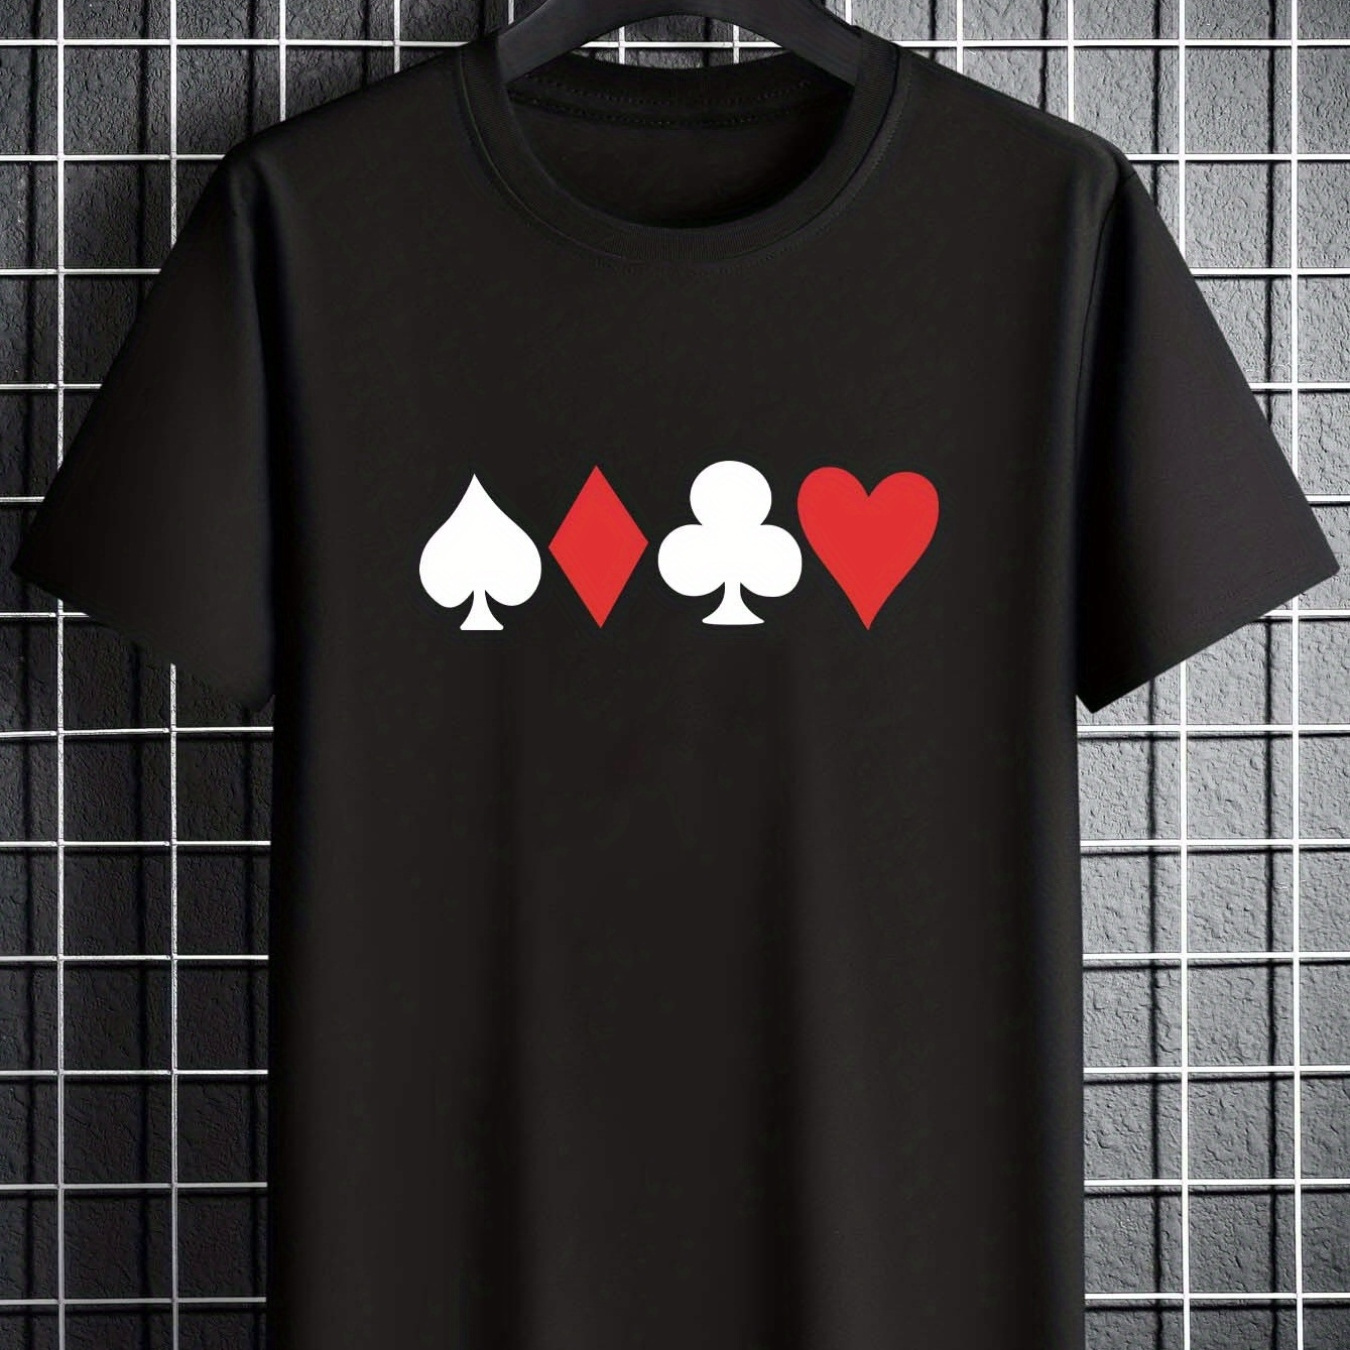 

Men's Poker Card Graphic T-shirt For Summer Outdoor, Casual Slightly Stretch Crew Neck Tee Short Sleeve Stylish Clothing